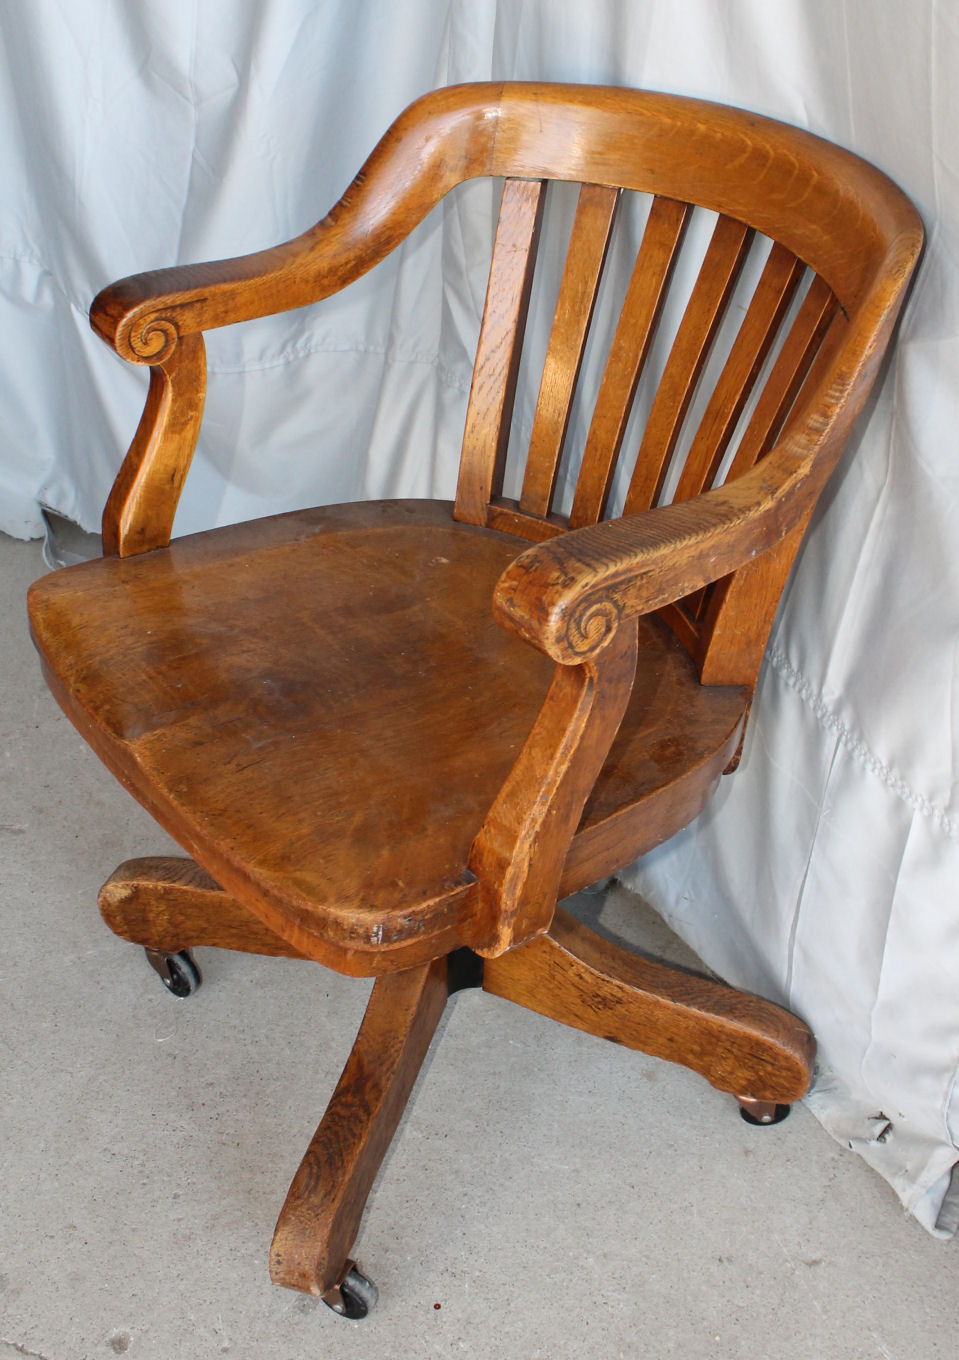 Bargain John's Antiques | Antique Oak swivel Office Chair with arms